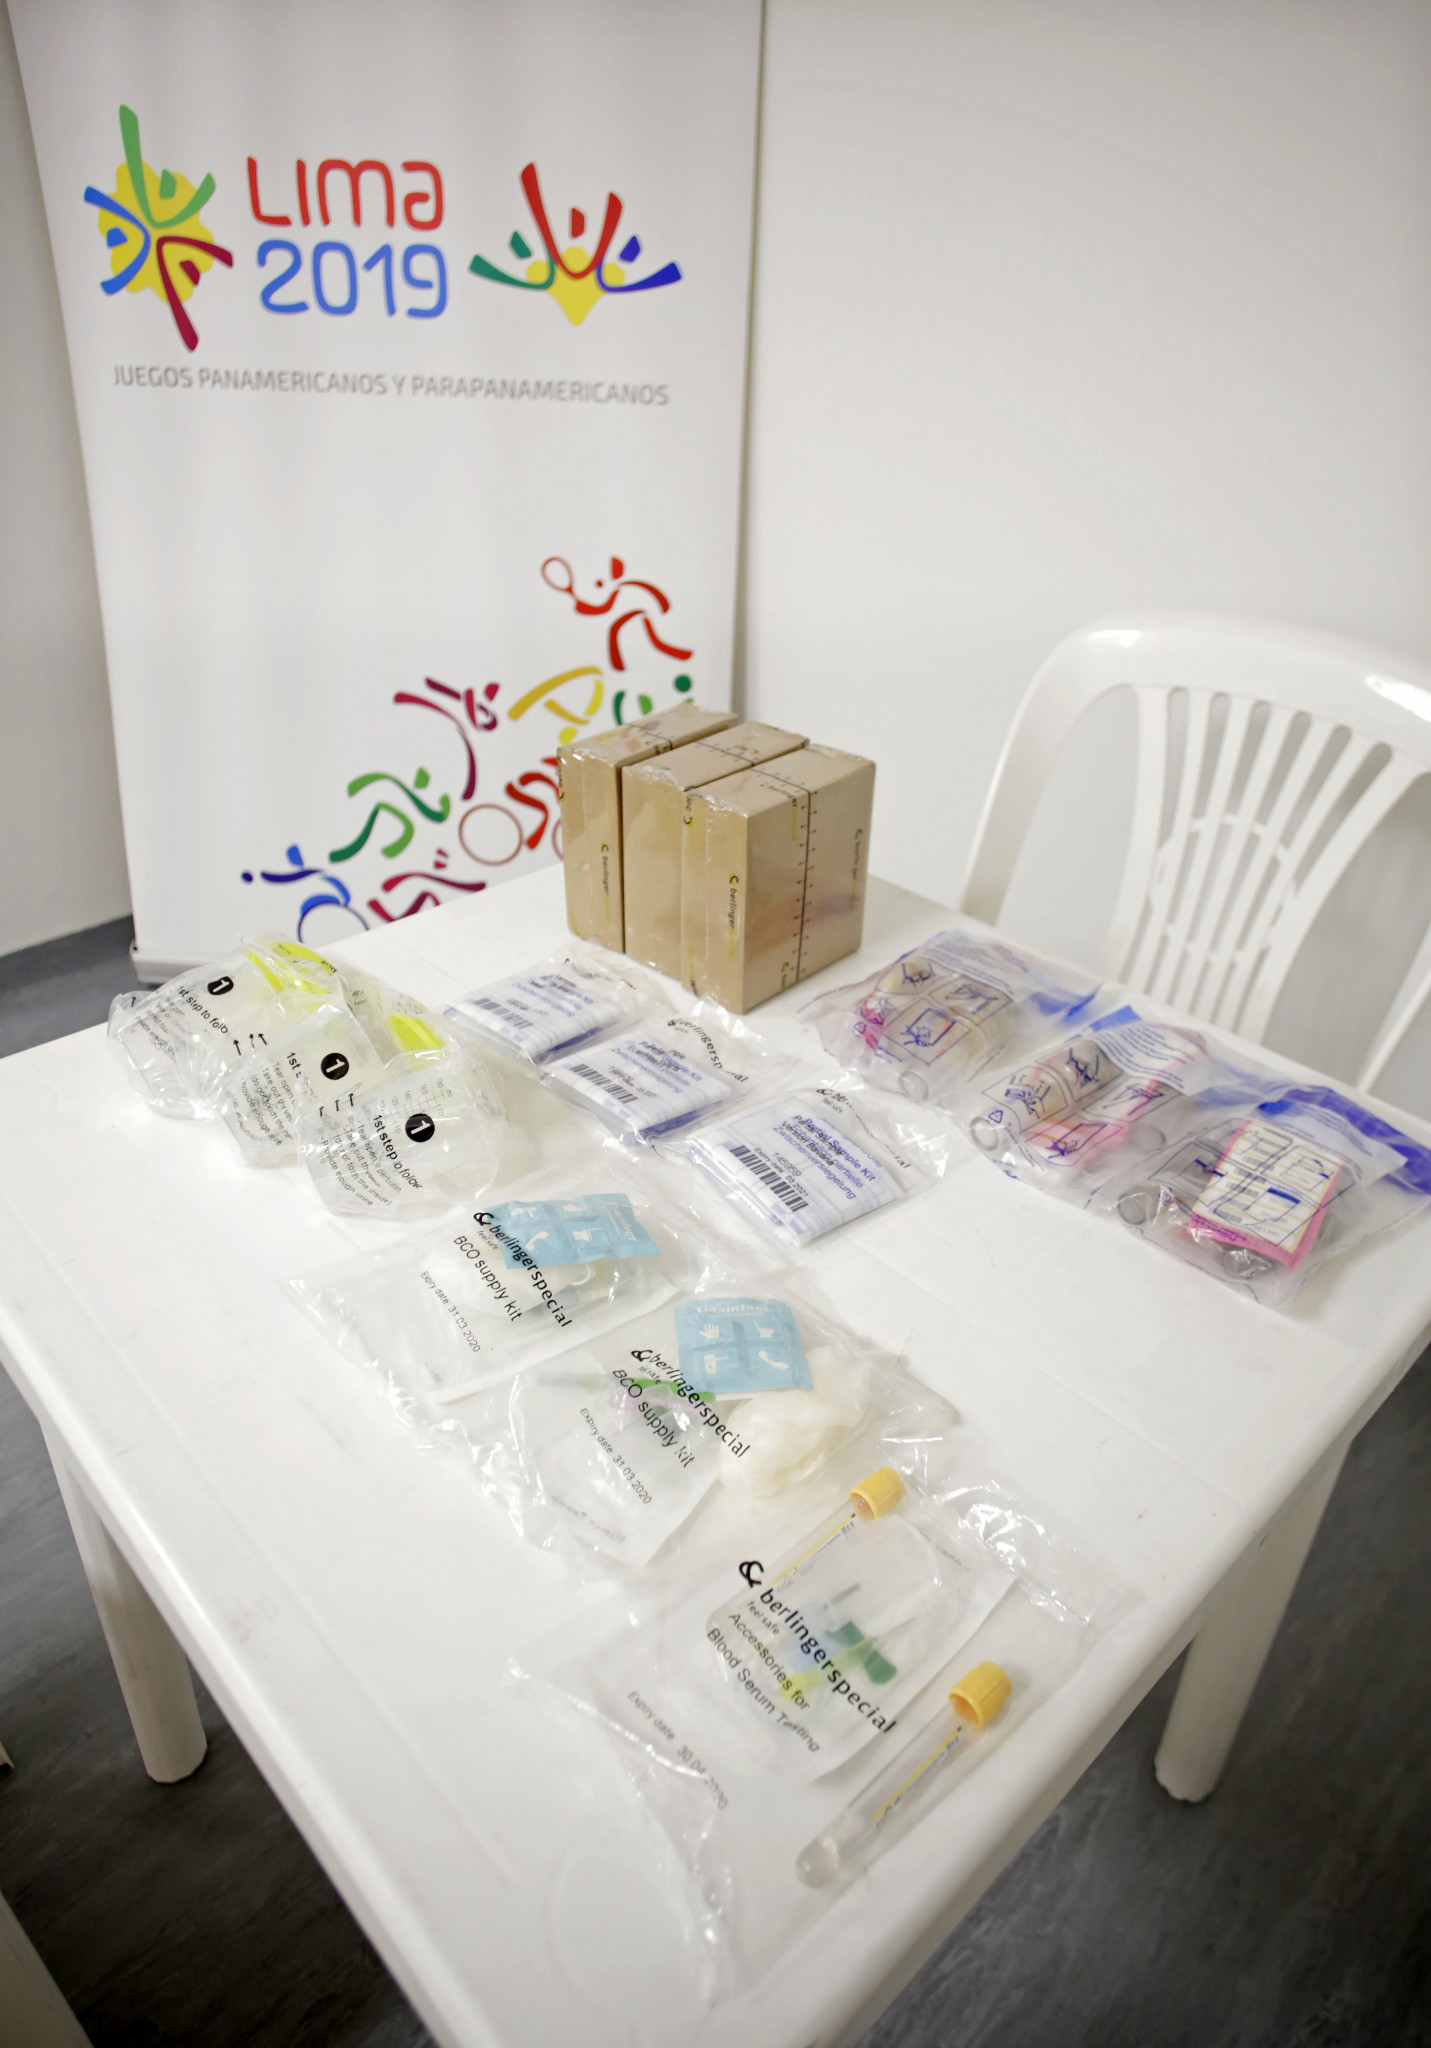 Lima 2019 organisers have revealed there will be a total of 32 doping control stations collecting samples during this year's Pan American and Parapan Games ©Lima 2019